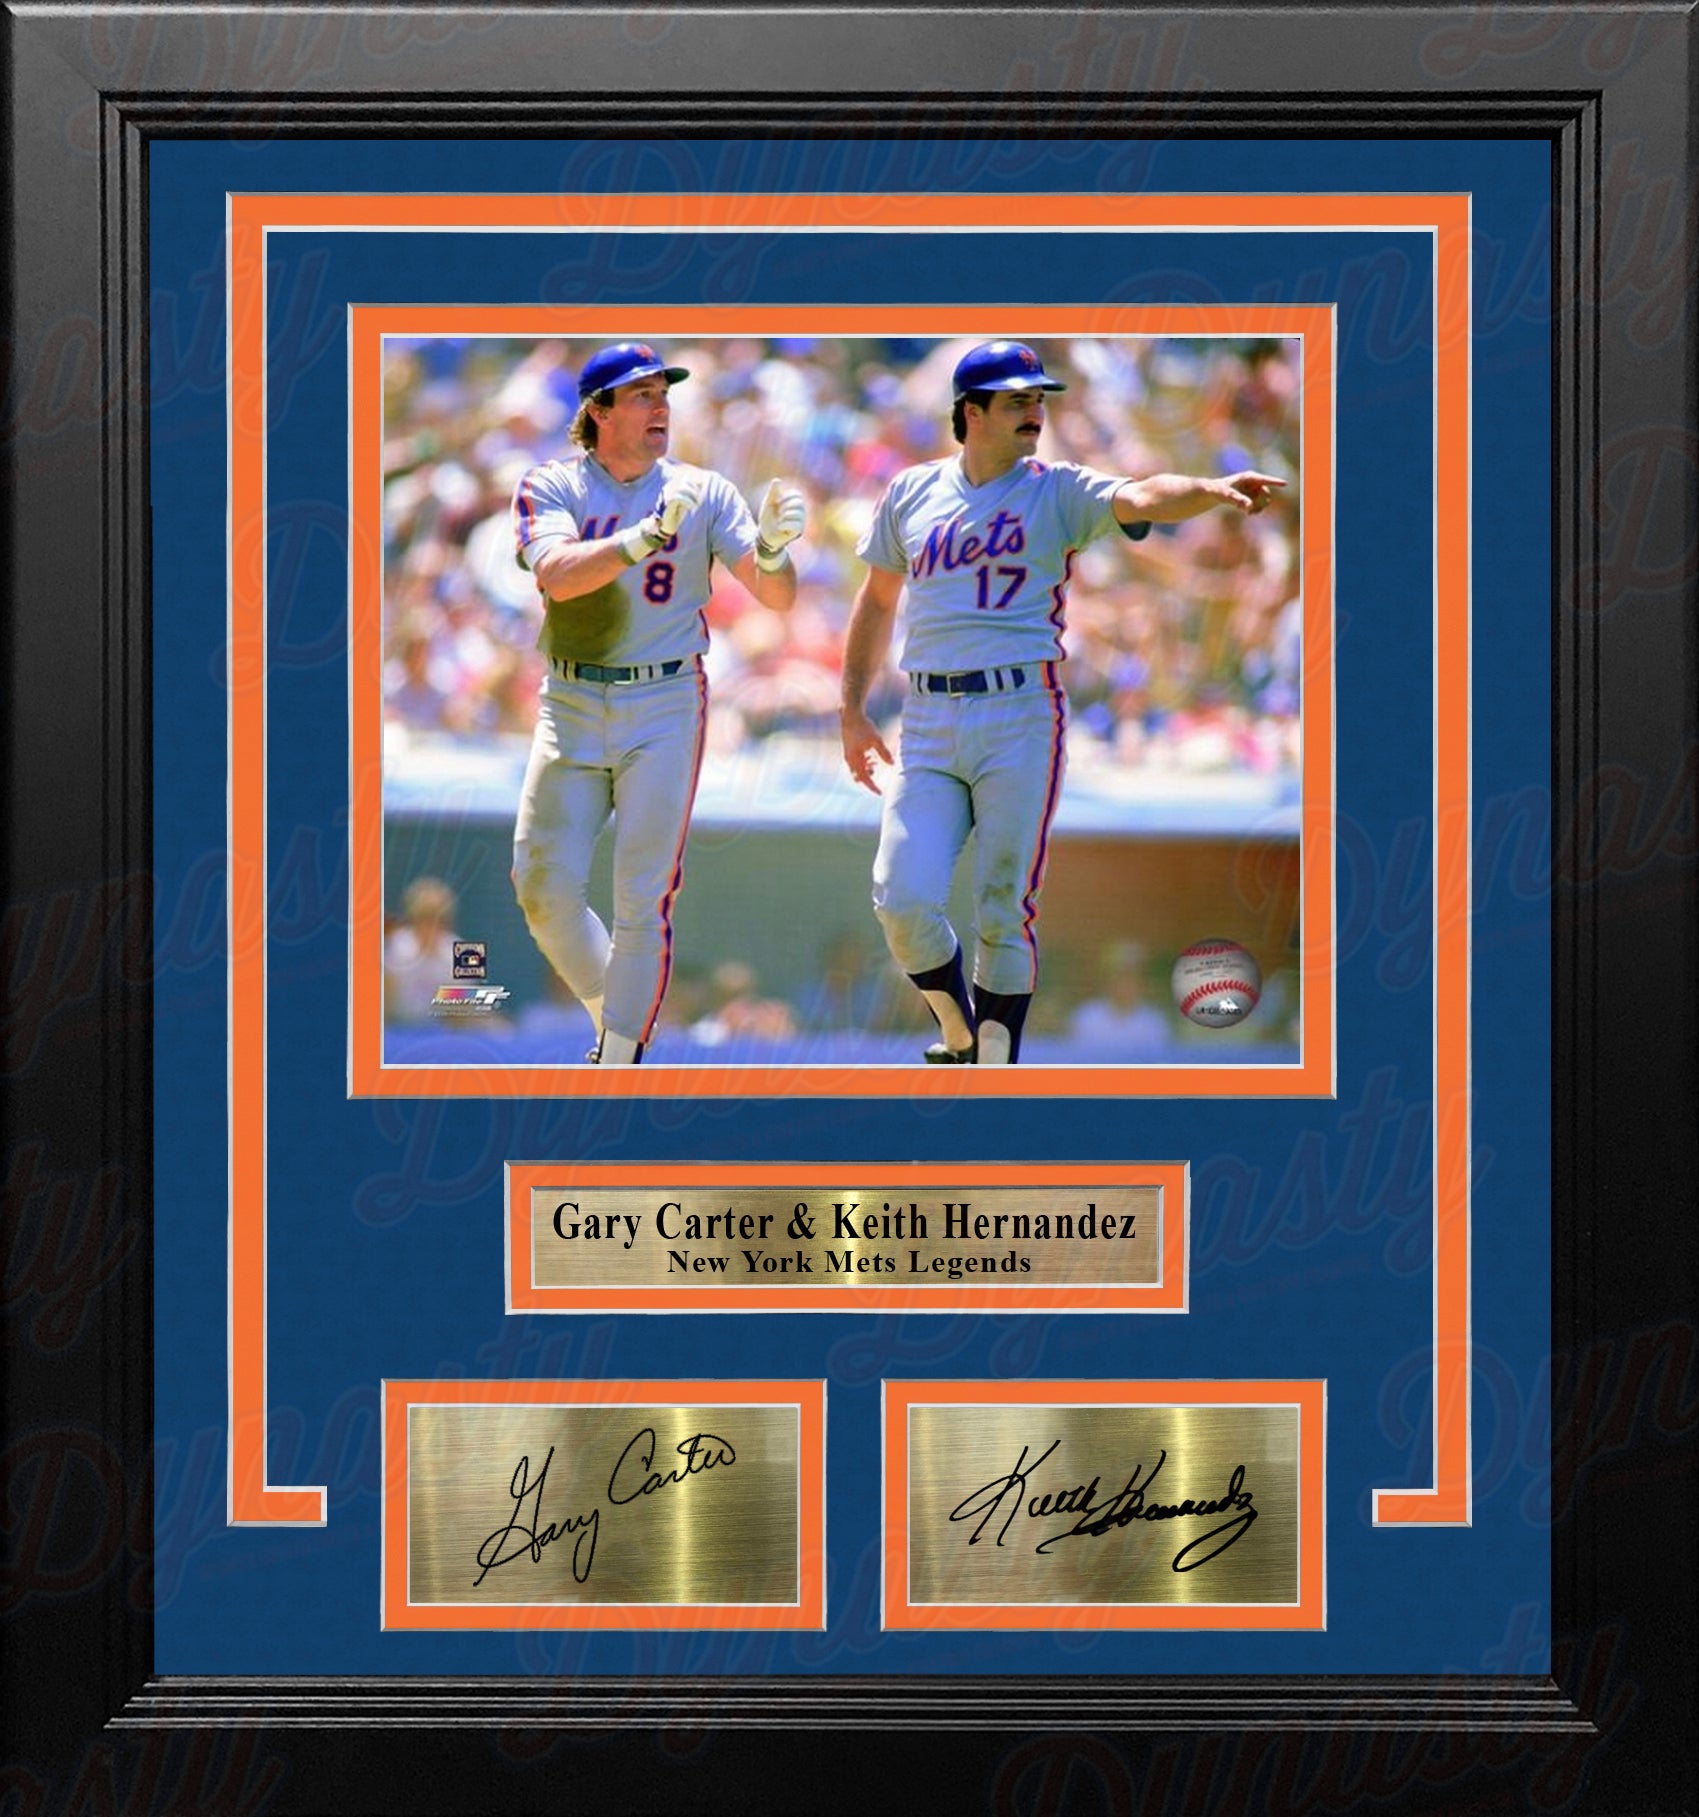 Gary Carter & Keith Hernandez in Action New York Mets 8" x 10" Framed Photo with Engraved Autographs - Dynasty Sports & Framing 